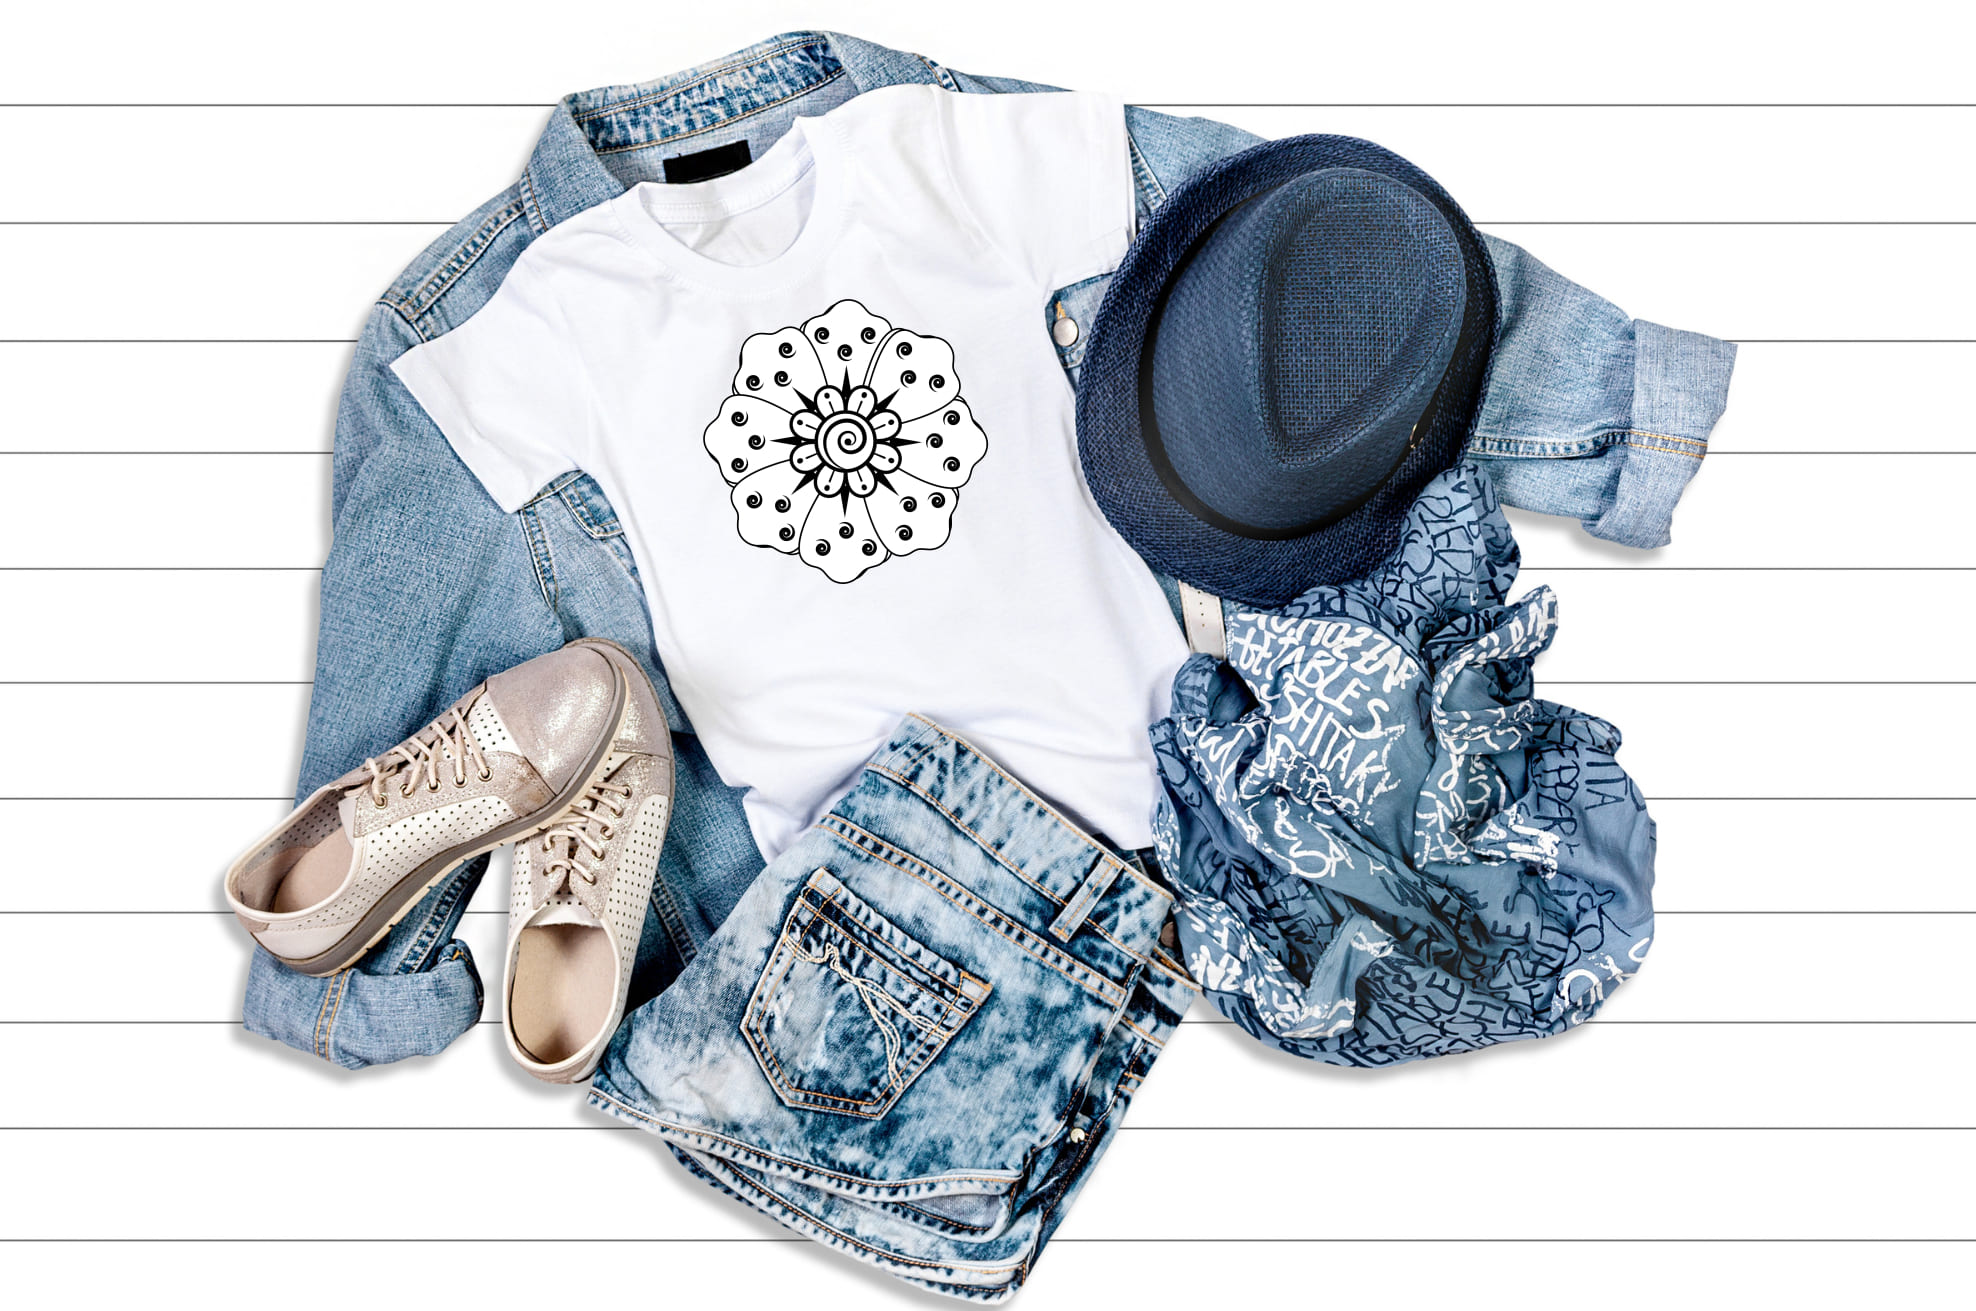 Jeans look with the white t-shirt with a laconic and delicate mandala illustration.